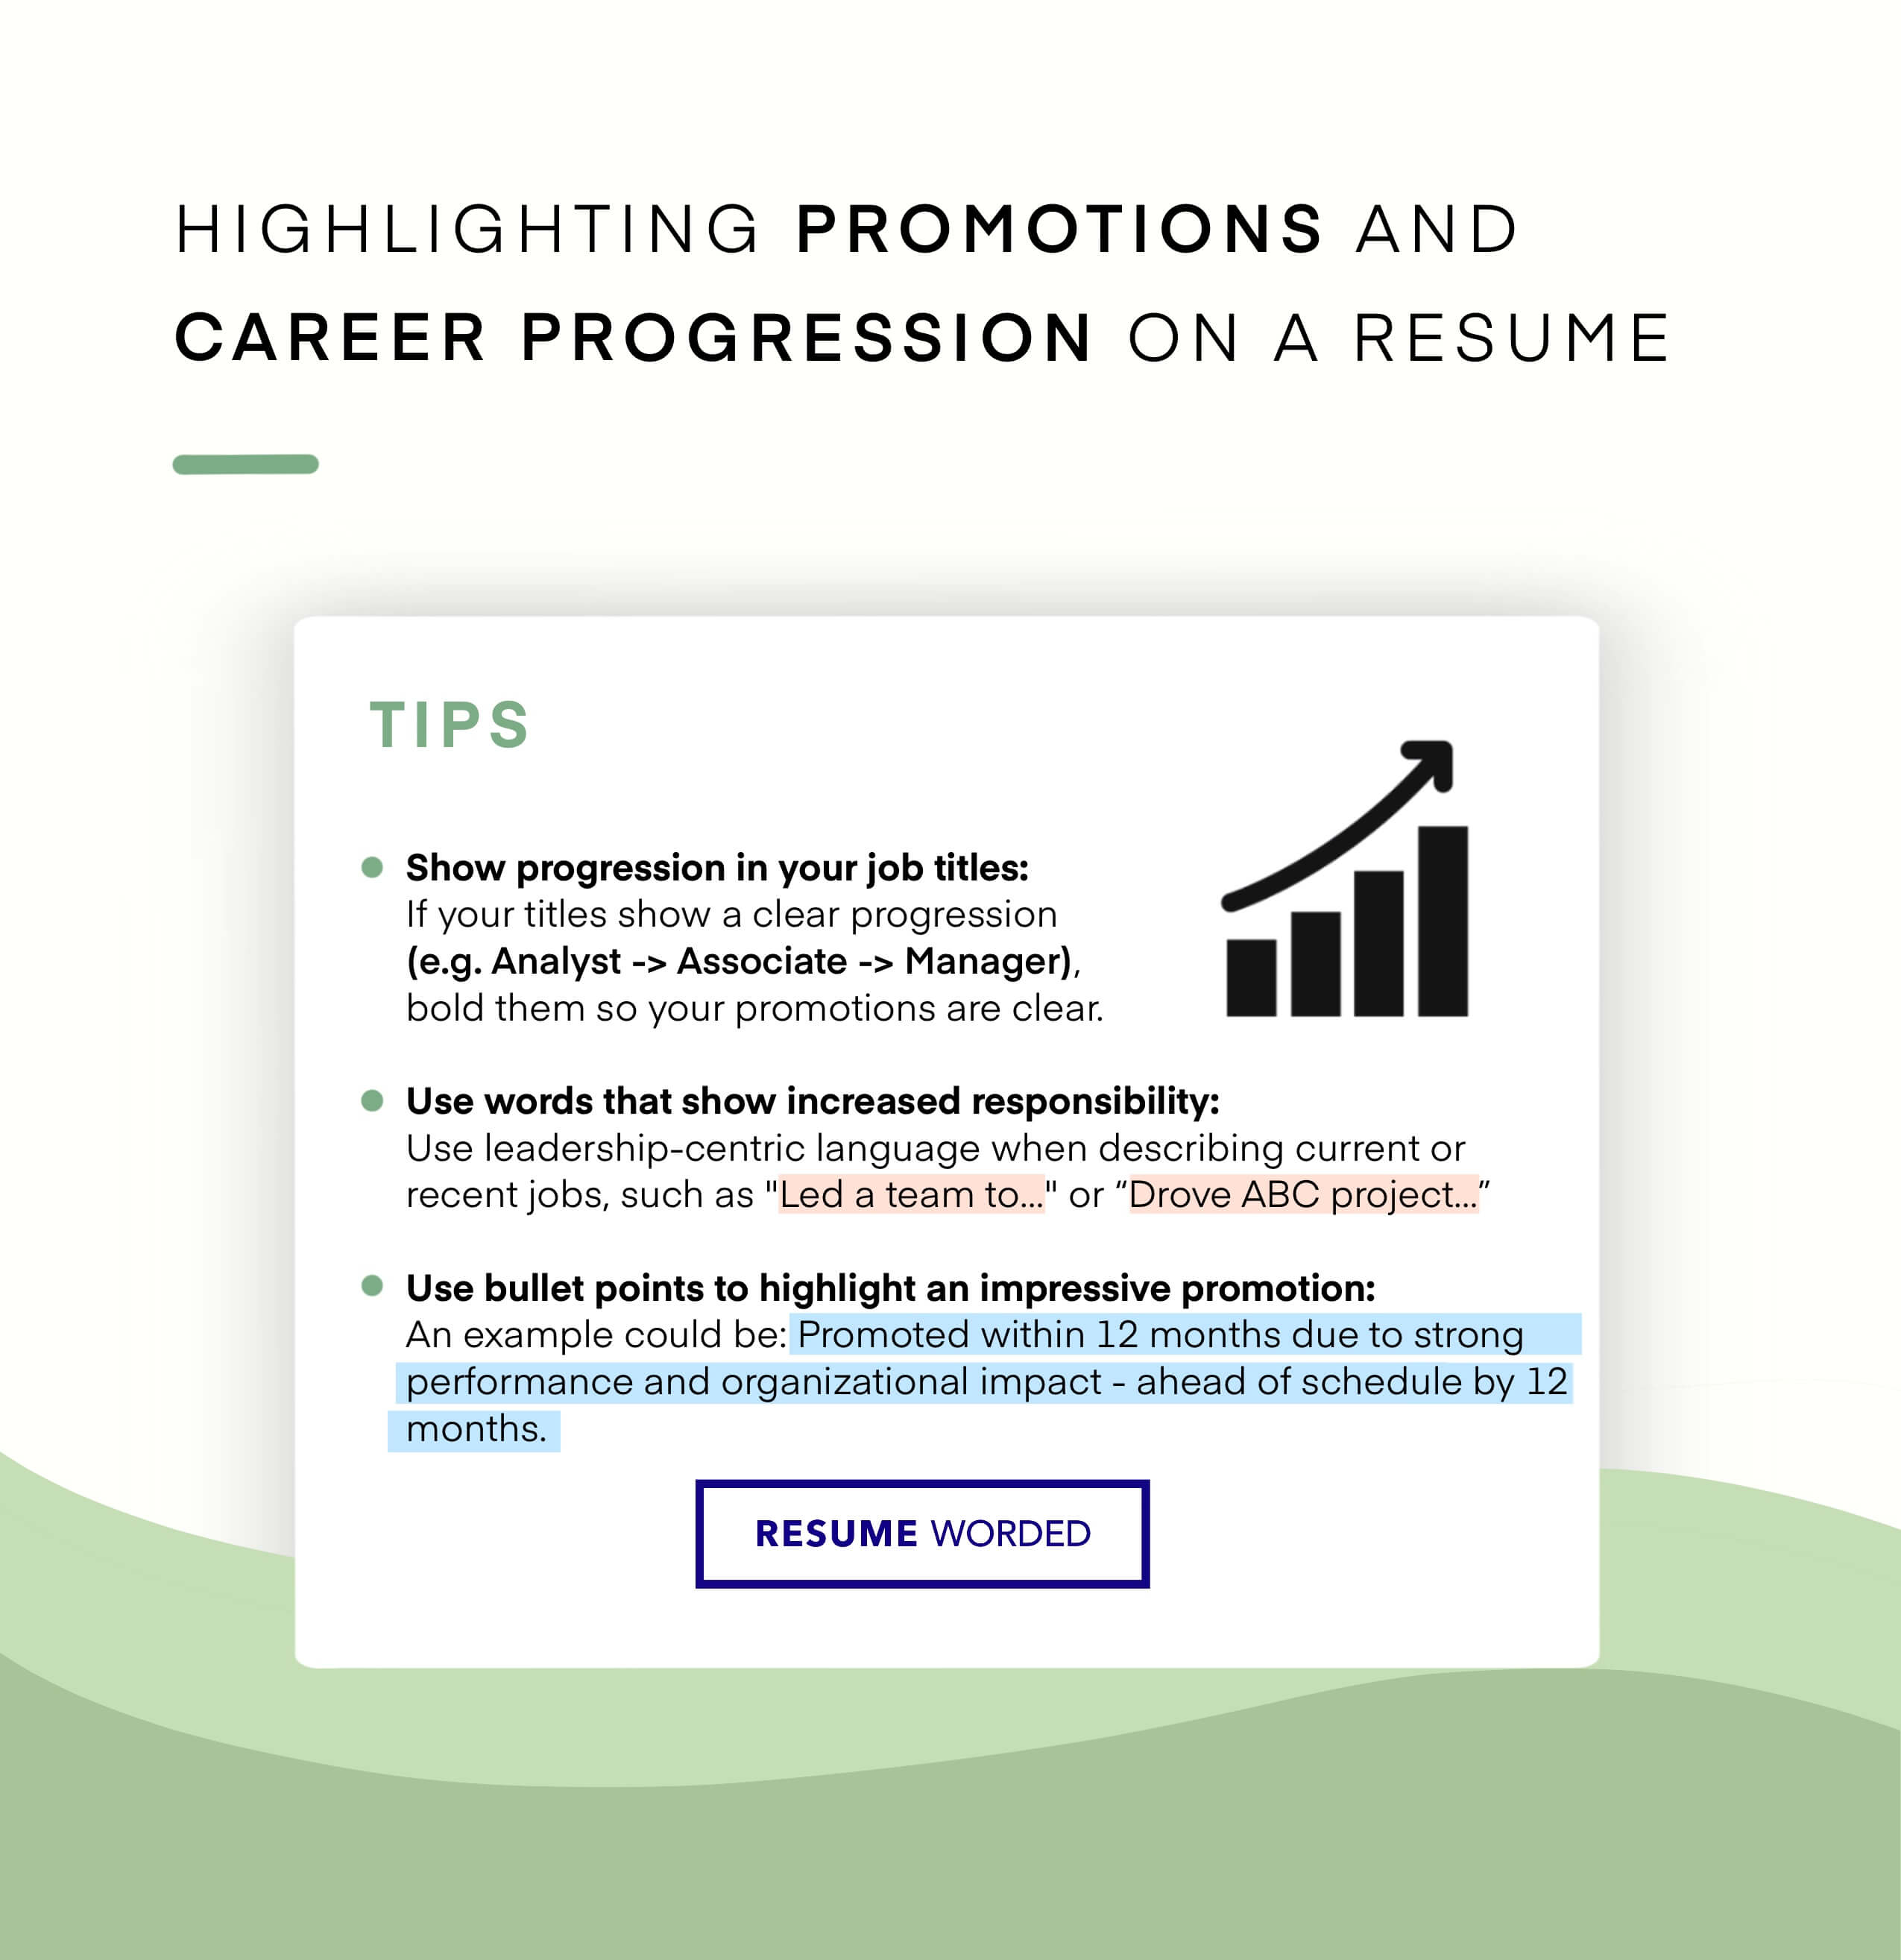 Shows internal promotions in the field of corporate law - Corporate Lawyer Resume